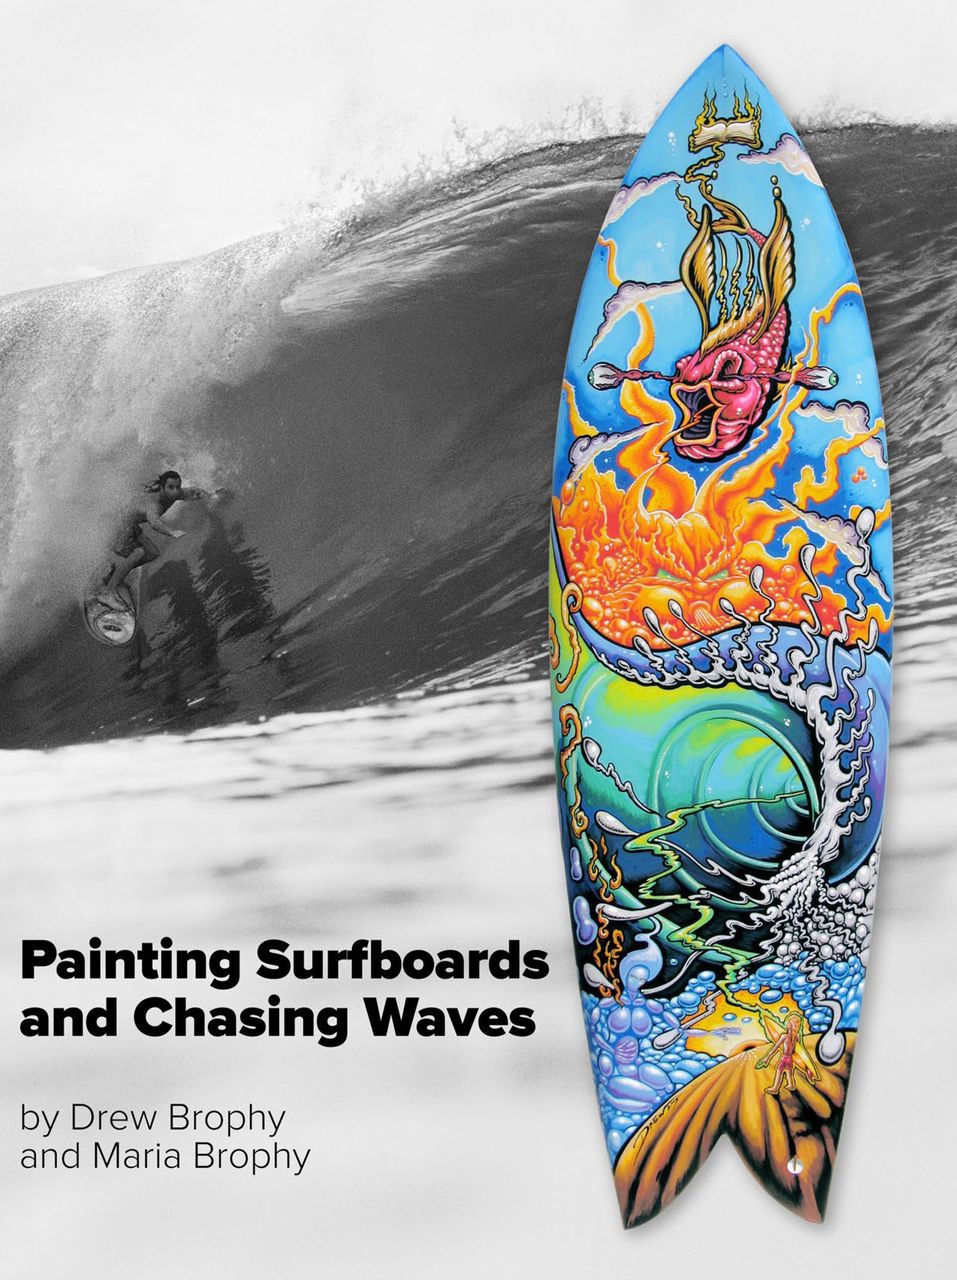 PAINTING SURFBOARDS AND CHASING WAVES - A Retrospective by Drew Brophy